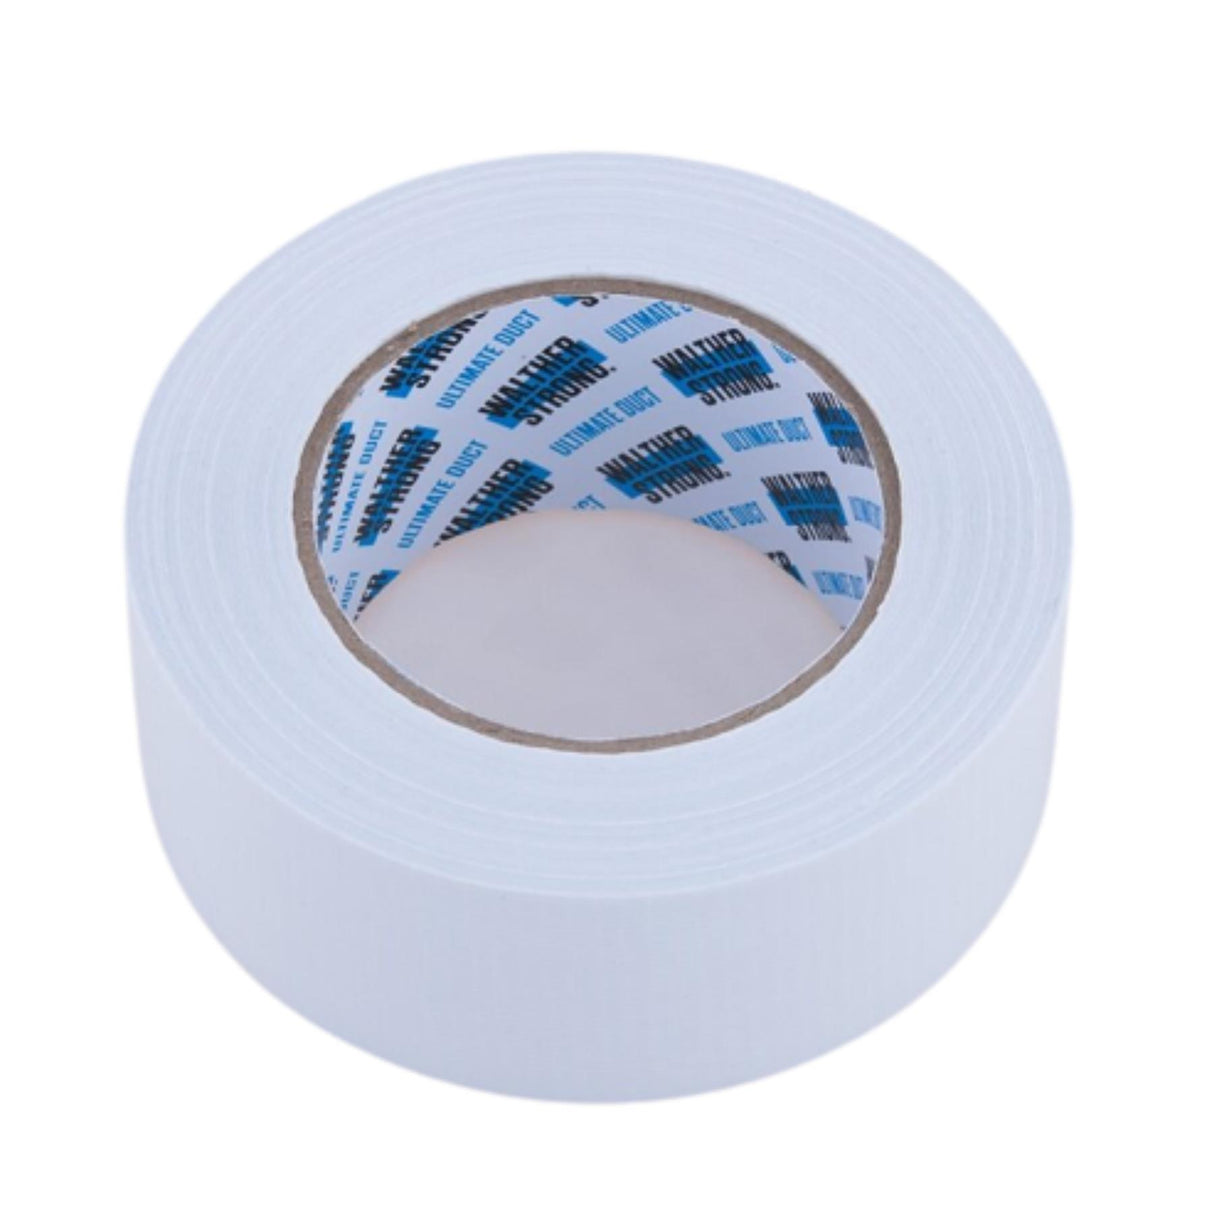 Walther Strong Ultimate Duct Tape White 50mm x 50m - PROTEUS MARINE STORE